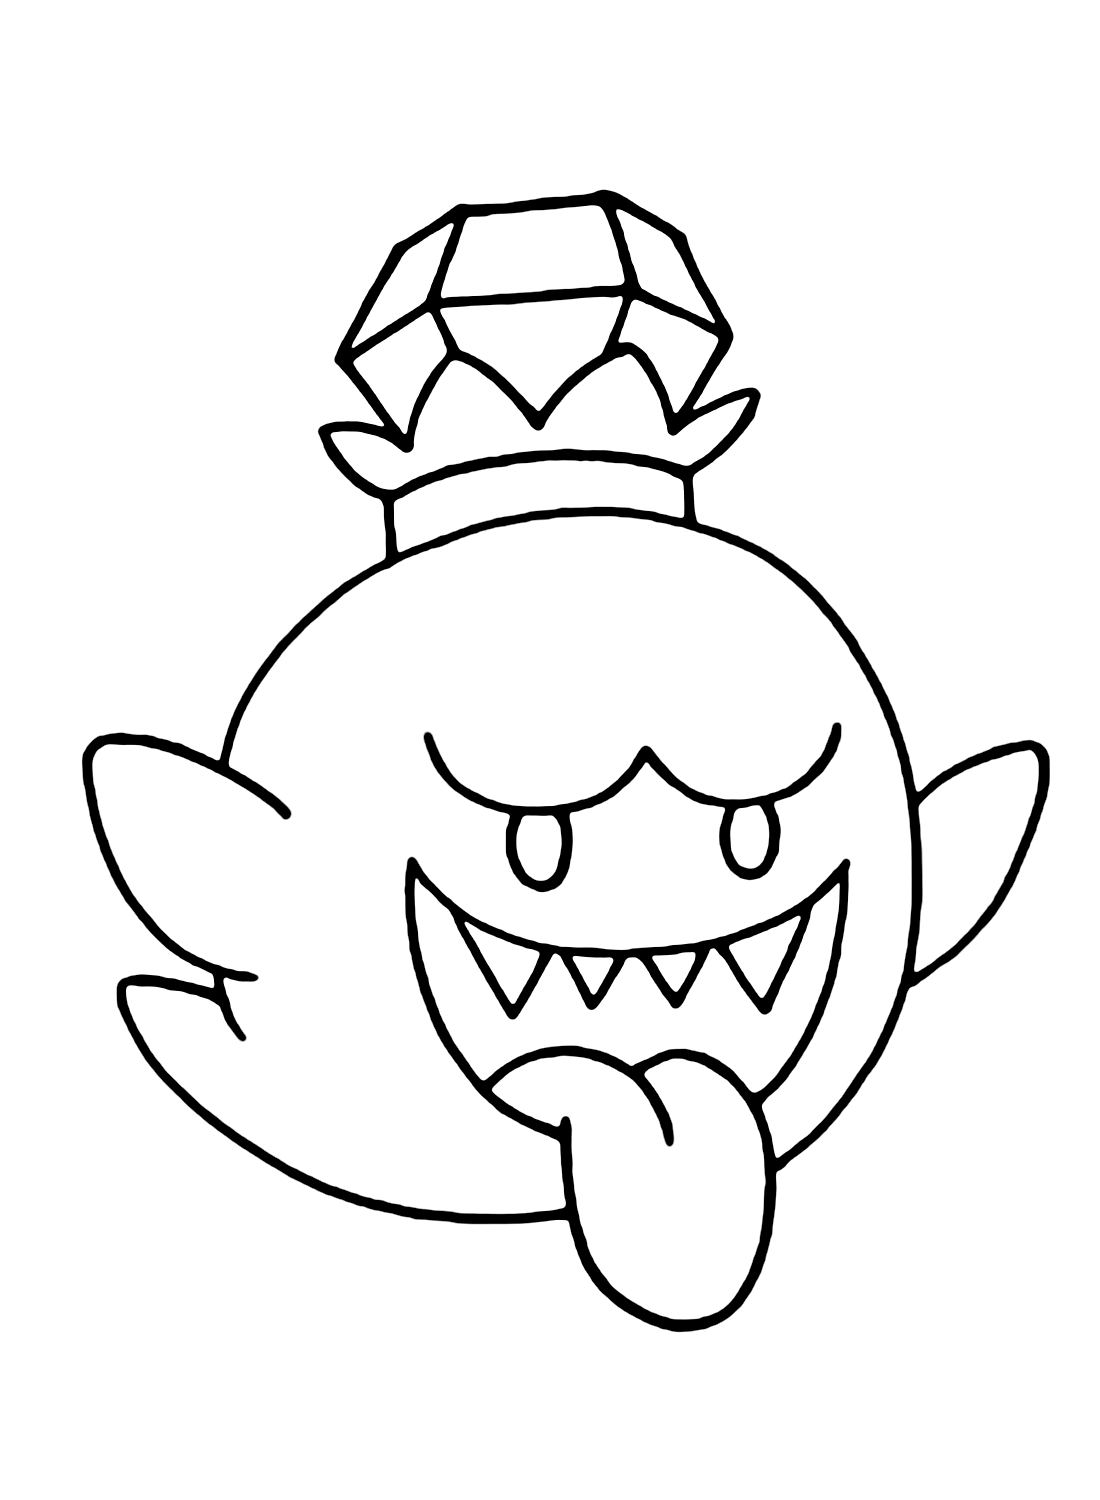 King Boo color Sheets Coloring Page